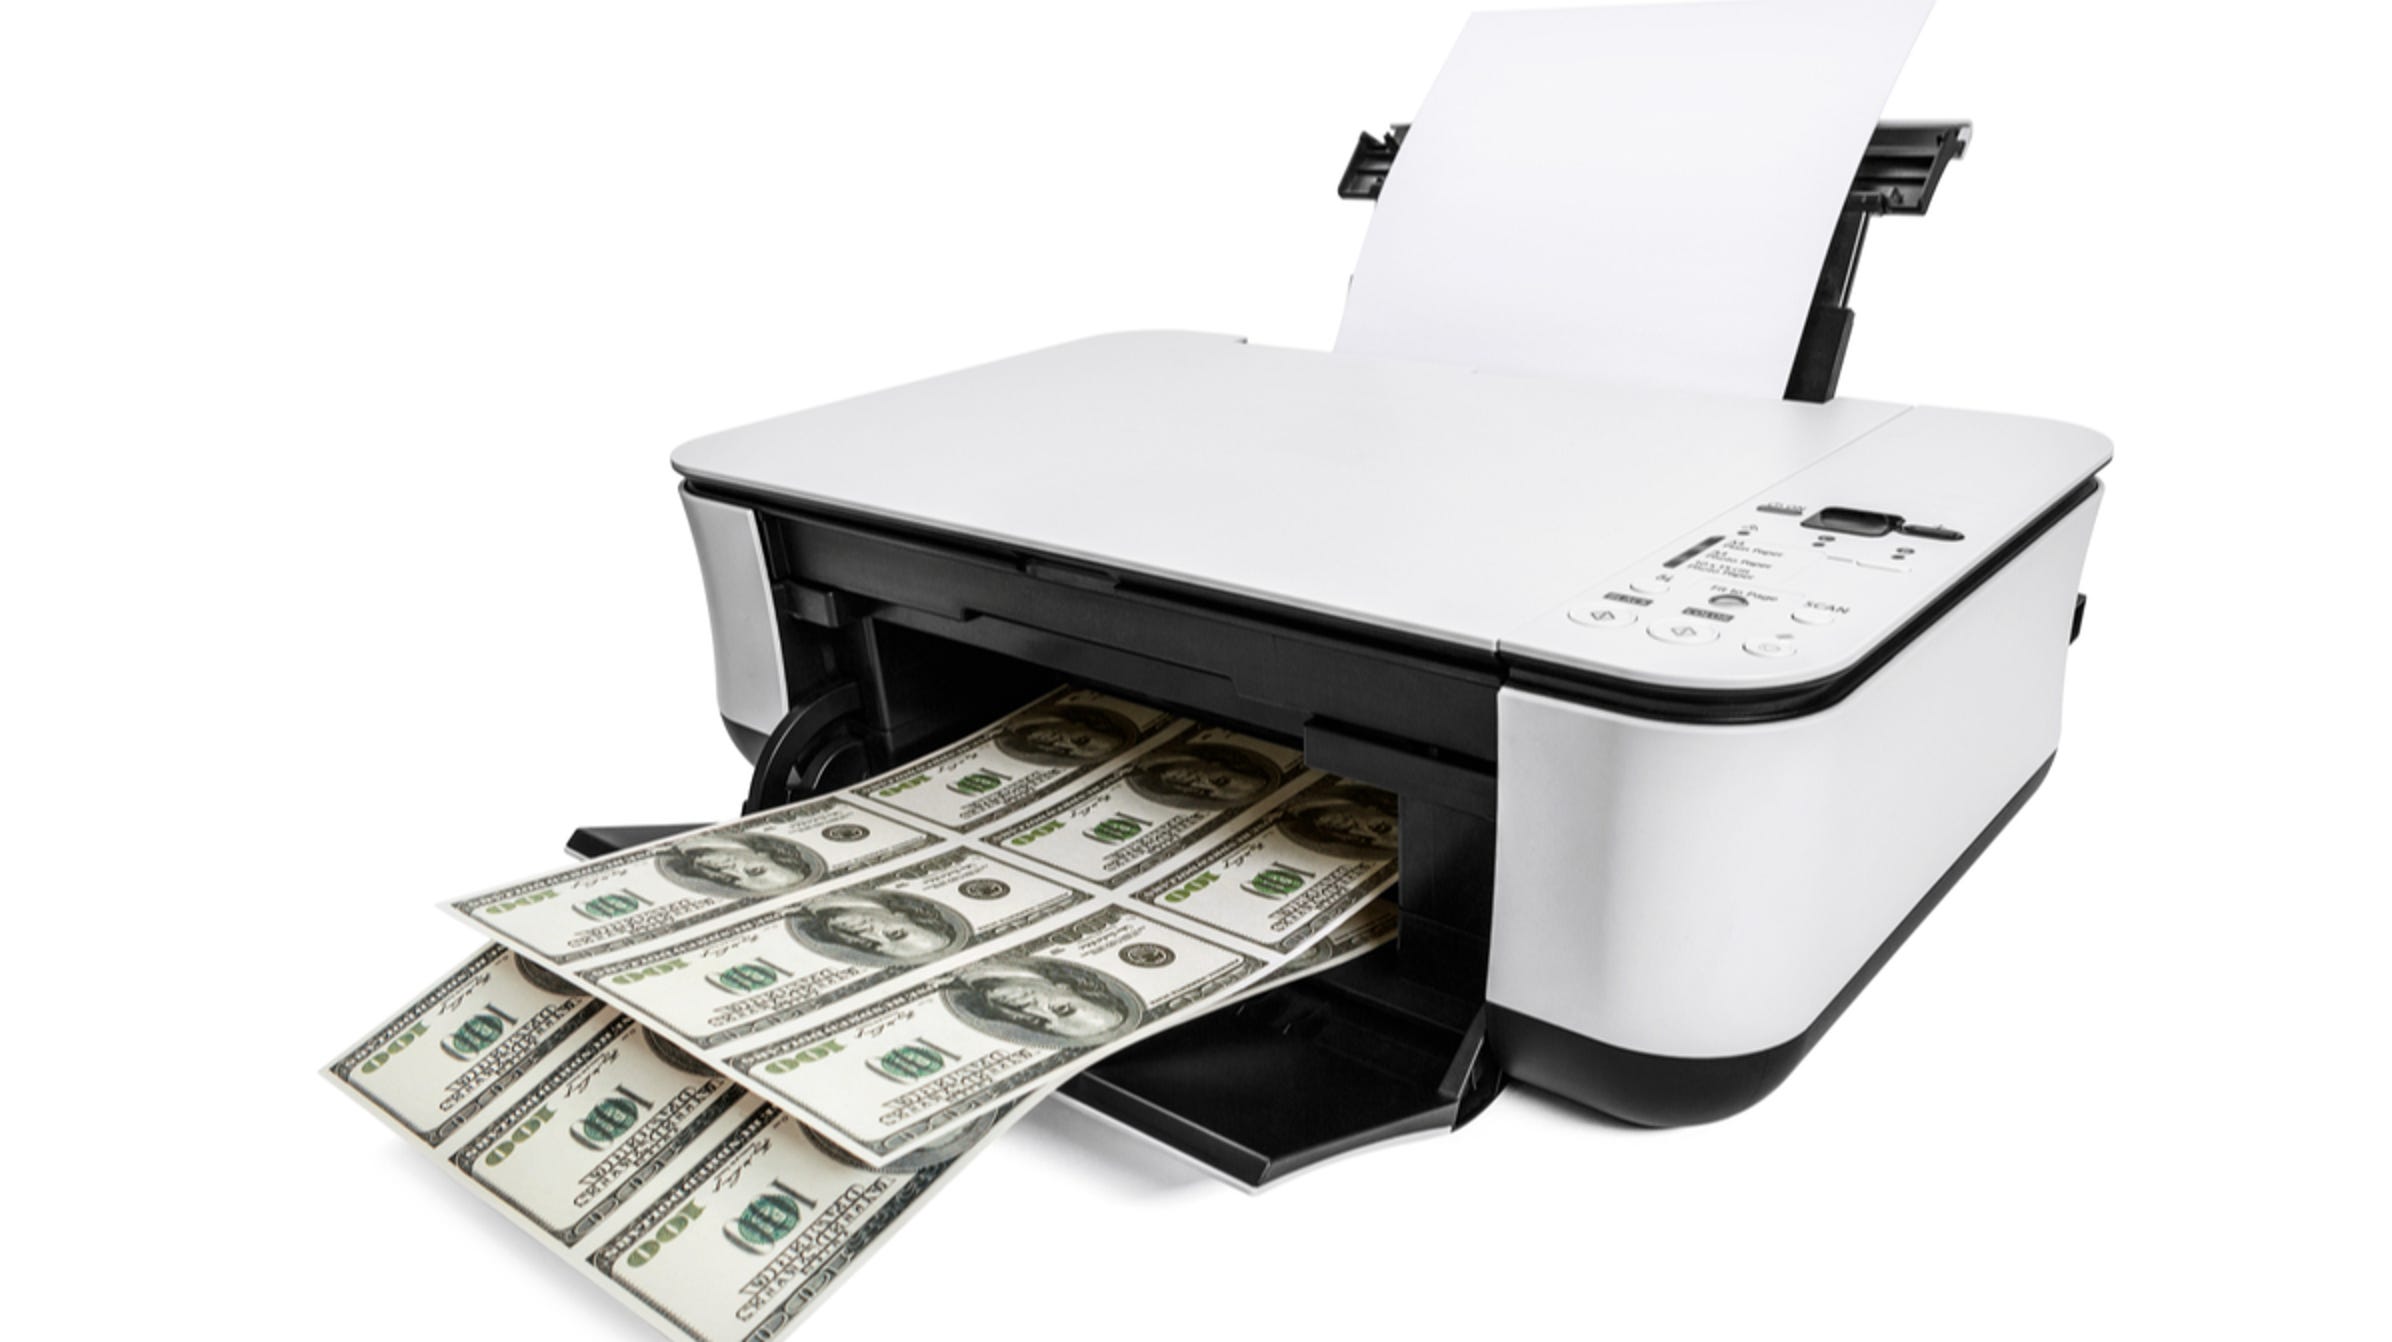 How Important Is Cost Per Page When Buying a Printer?